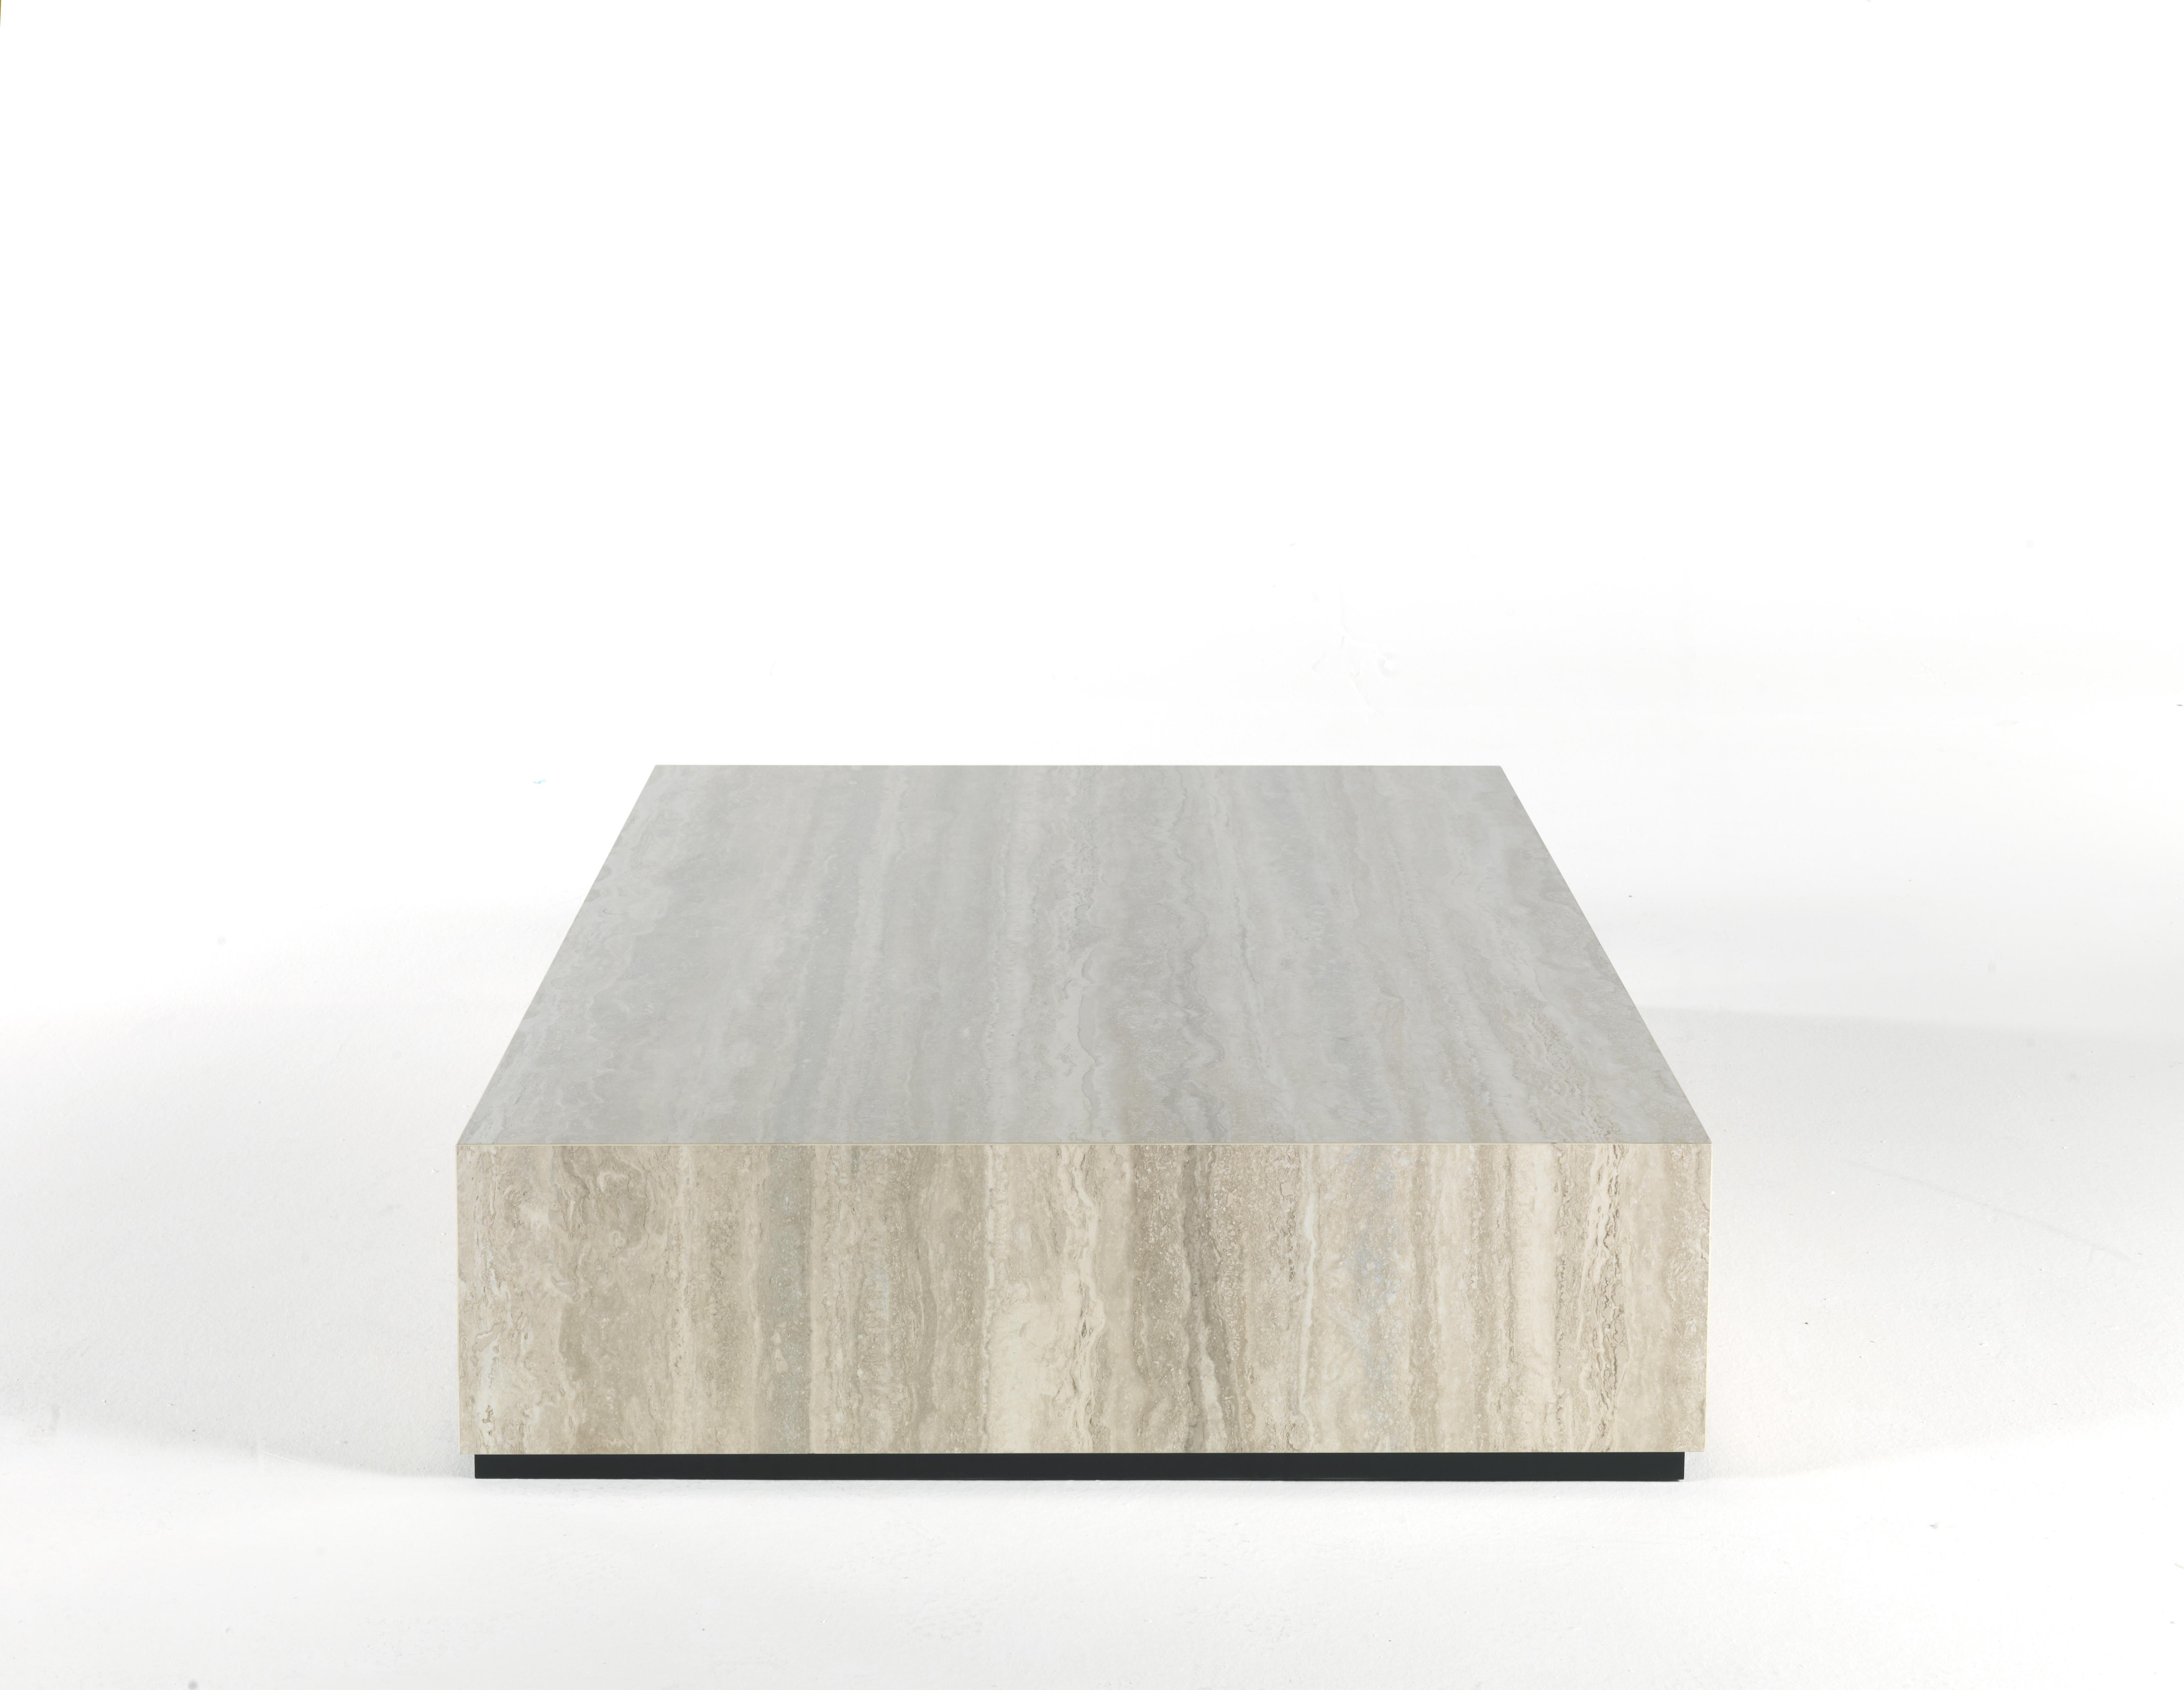 Assembled at 45 degrees, the travertine table Flair, with its geometric lines, it's a refined complement able to add a contemporary appeal to any environment.
Flair Central table with structure in wood covered in porcelain stoneware, Travertino